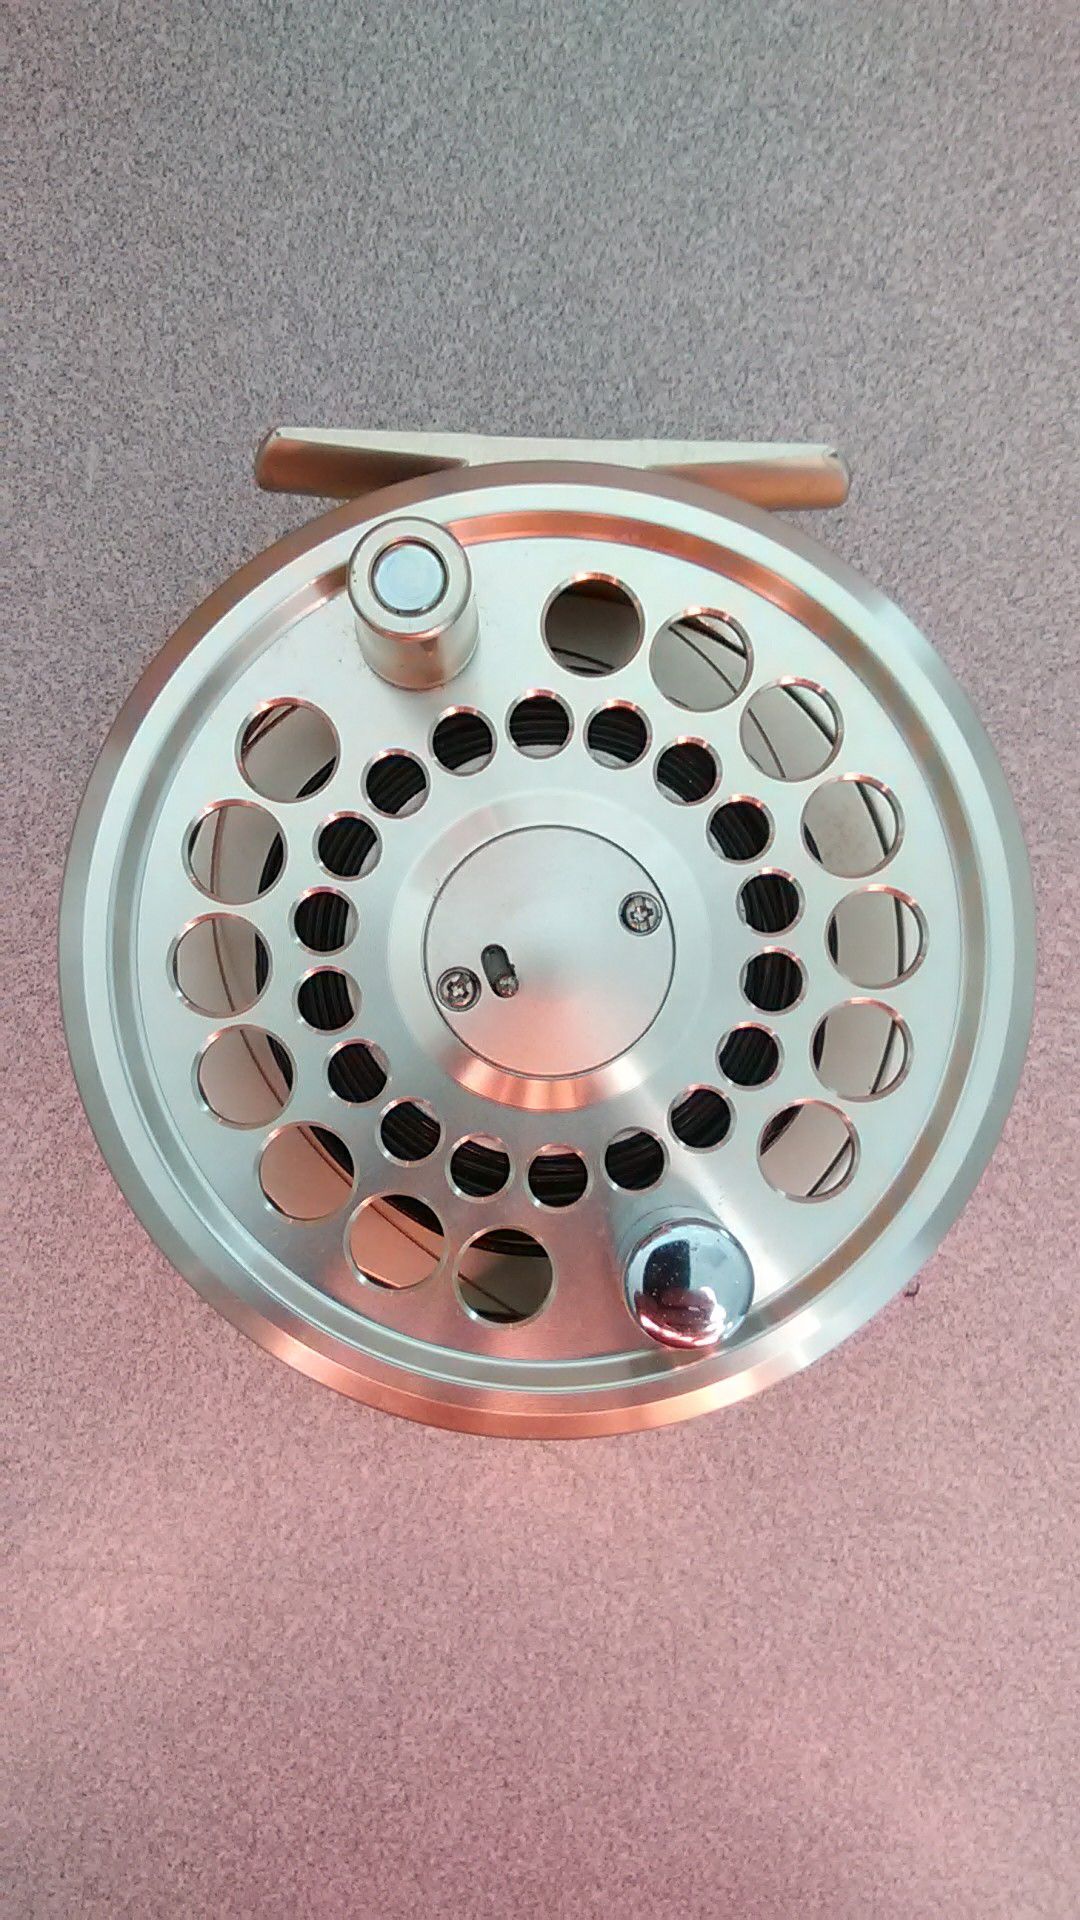 G Loomis Venture 7 Fly Reel for Sale in Tacoma, WA - OfferUp